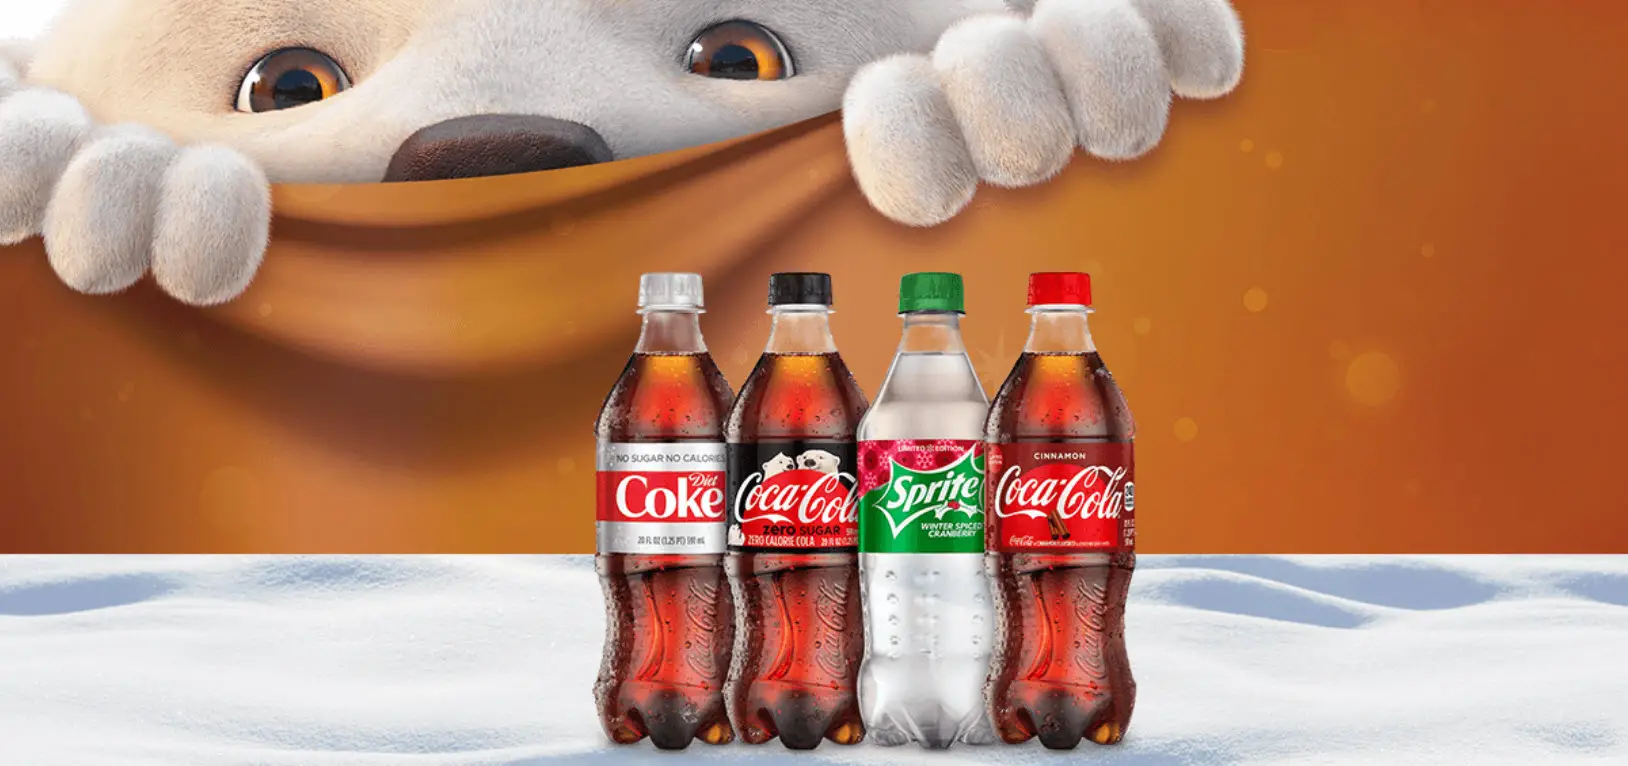 1,305 WINNERS! Enter a Coca-Cola product code or scan the sip & scan icon from any 20oz Coca-Cola beverage now for your chance to instantly win a $50 or $25 gift card! Free game codes will be available online starting December 21st.